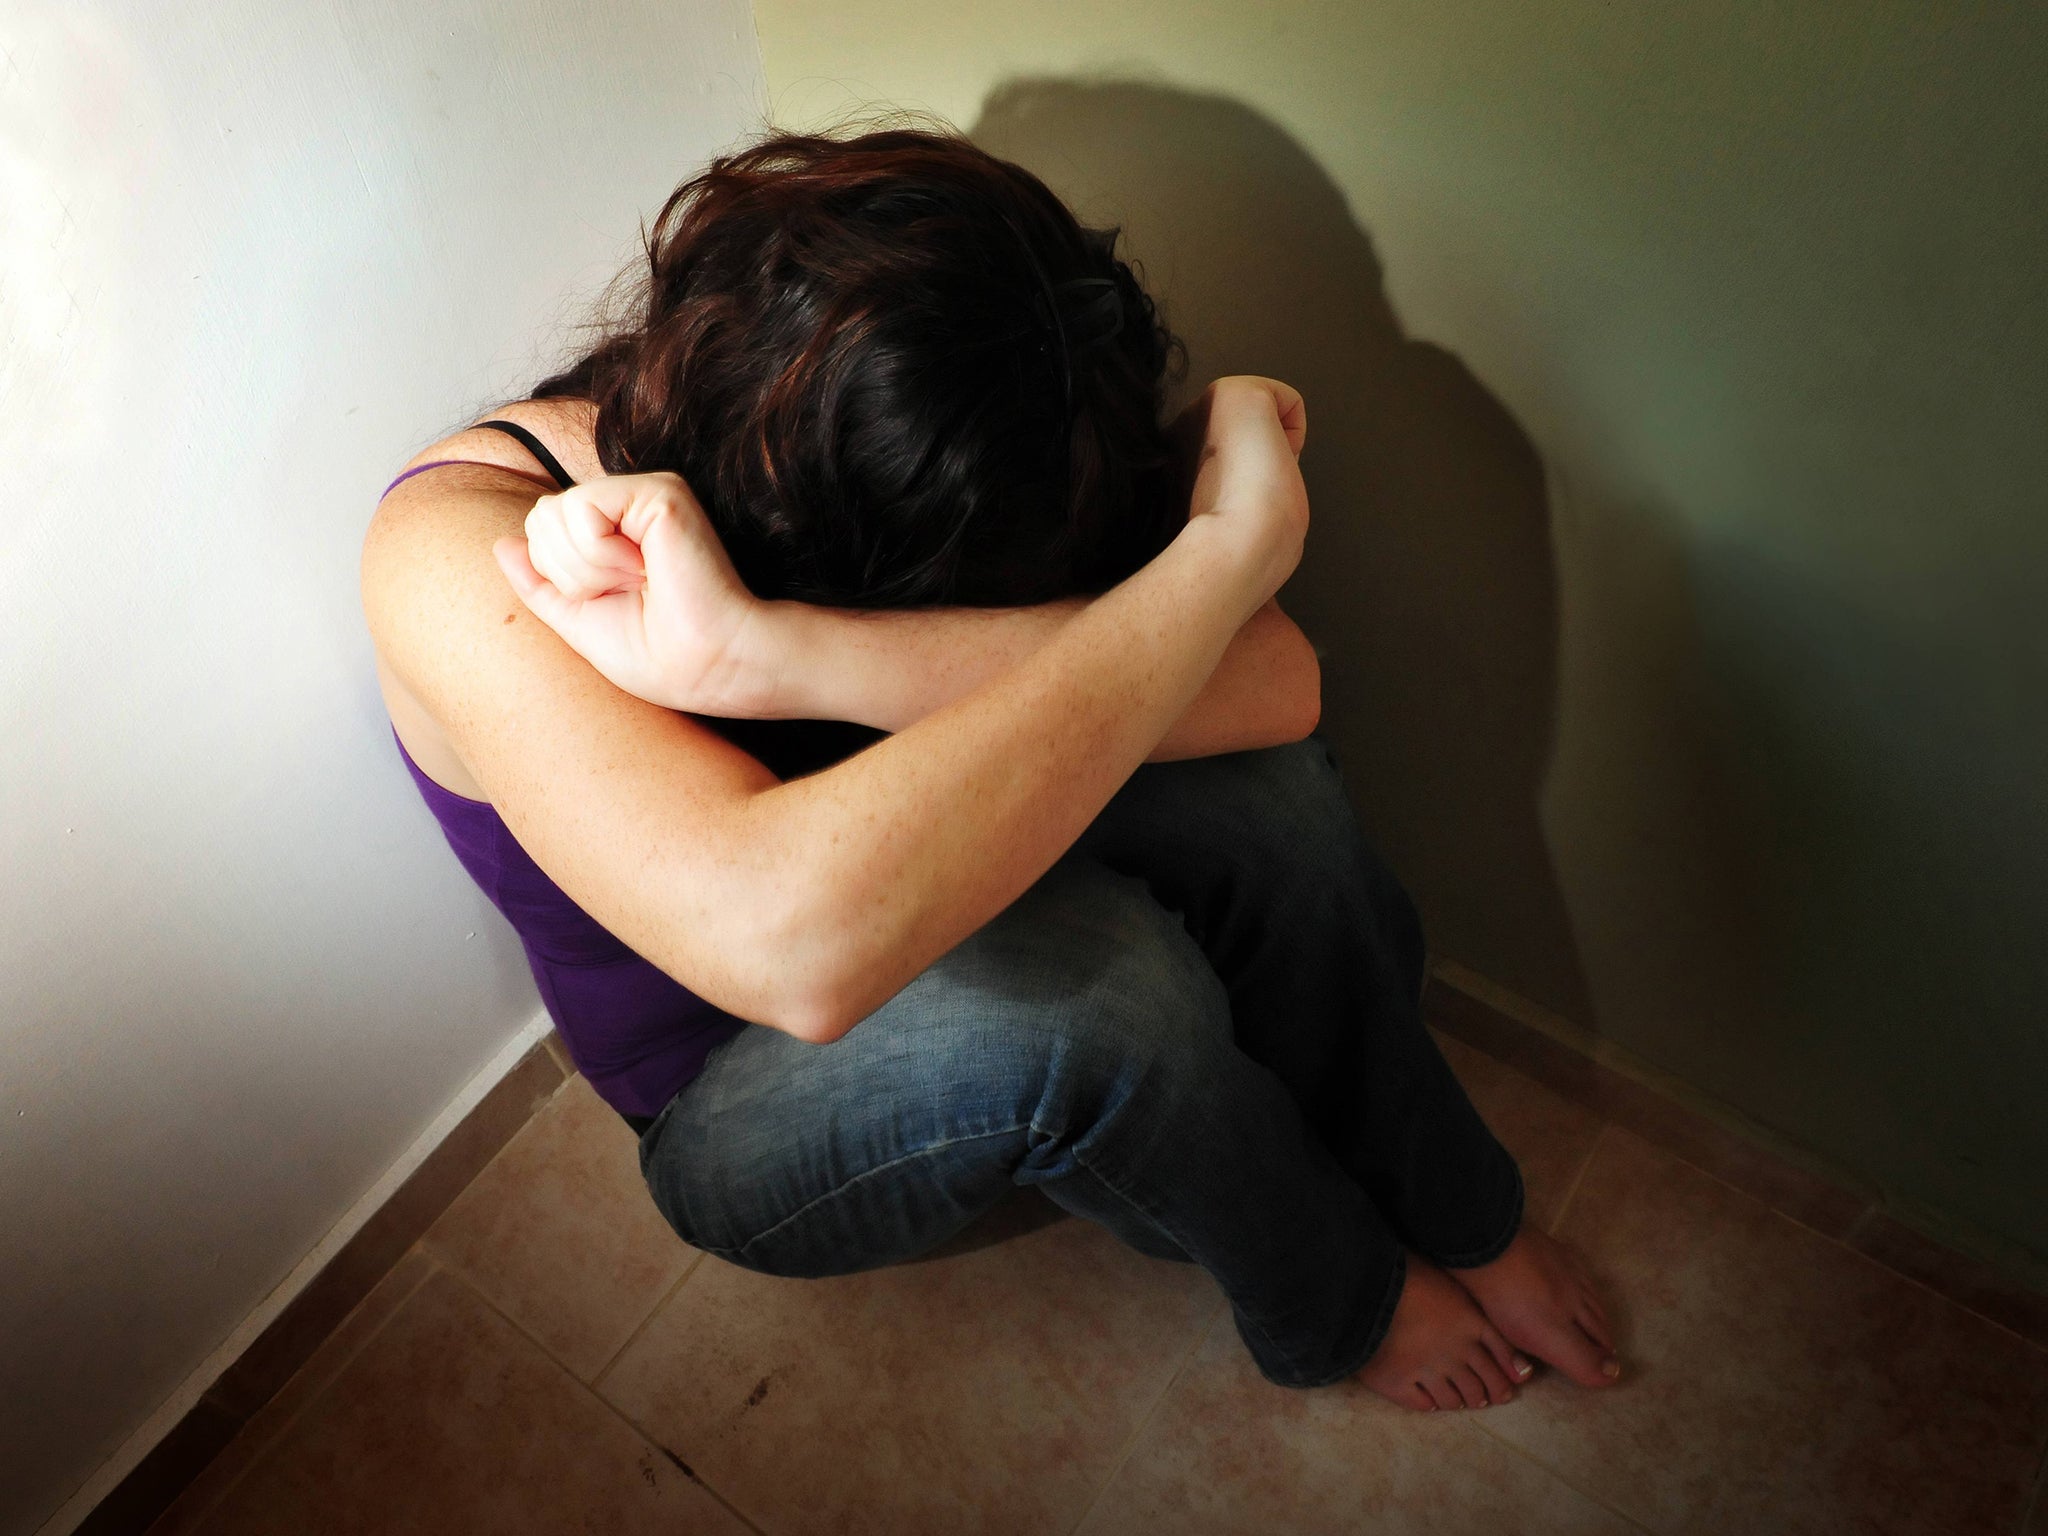 More than 160,000 calls were made to Rape Crisis helplines between March 2014 and March 2015